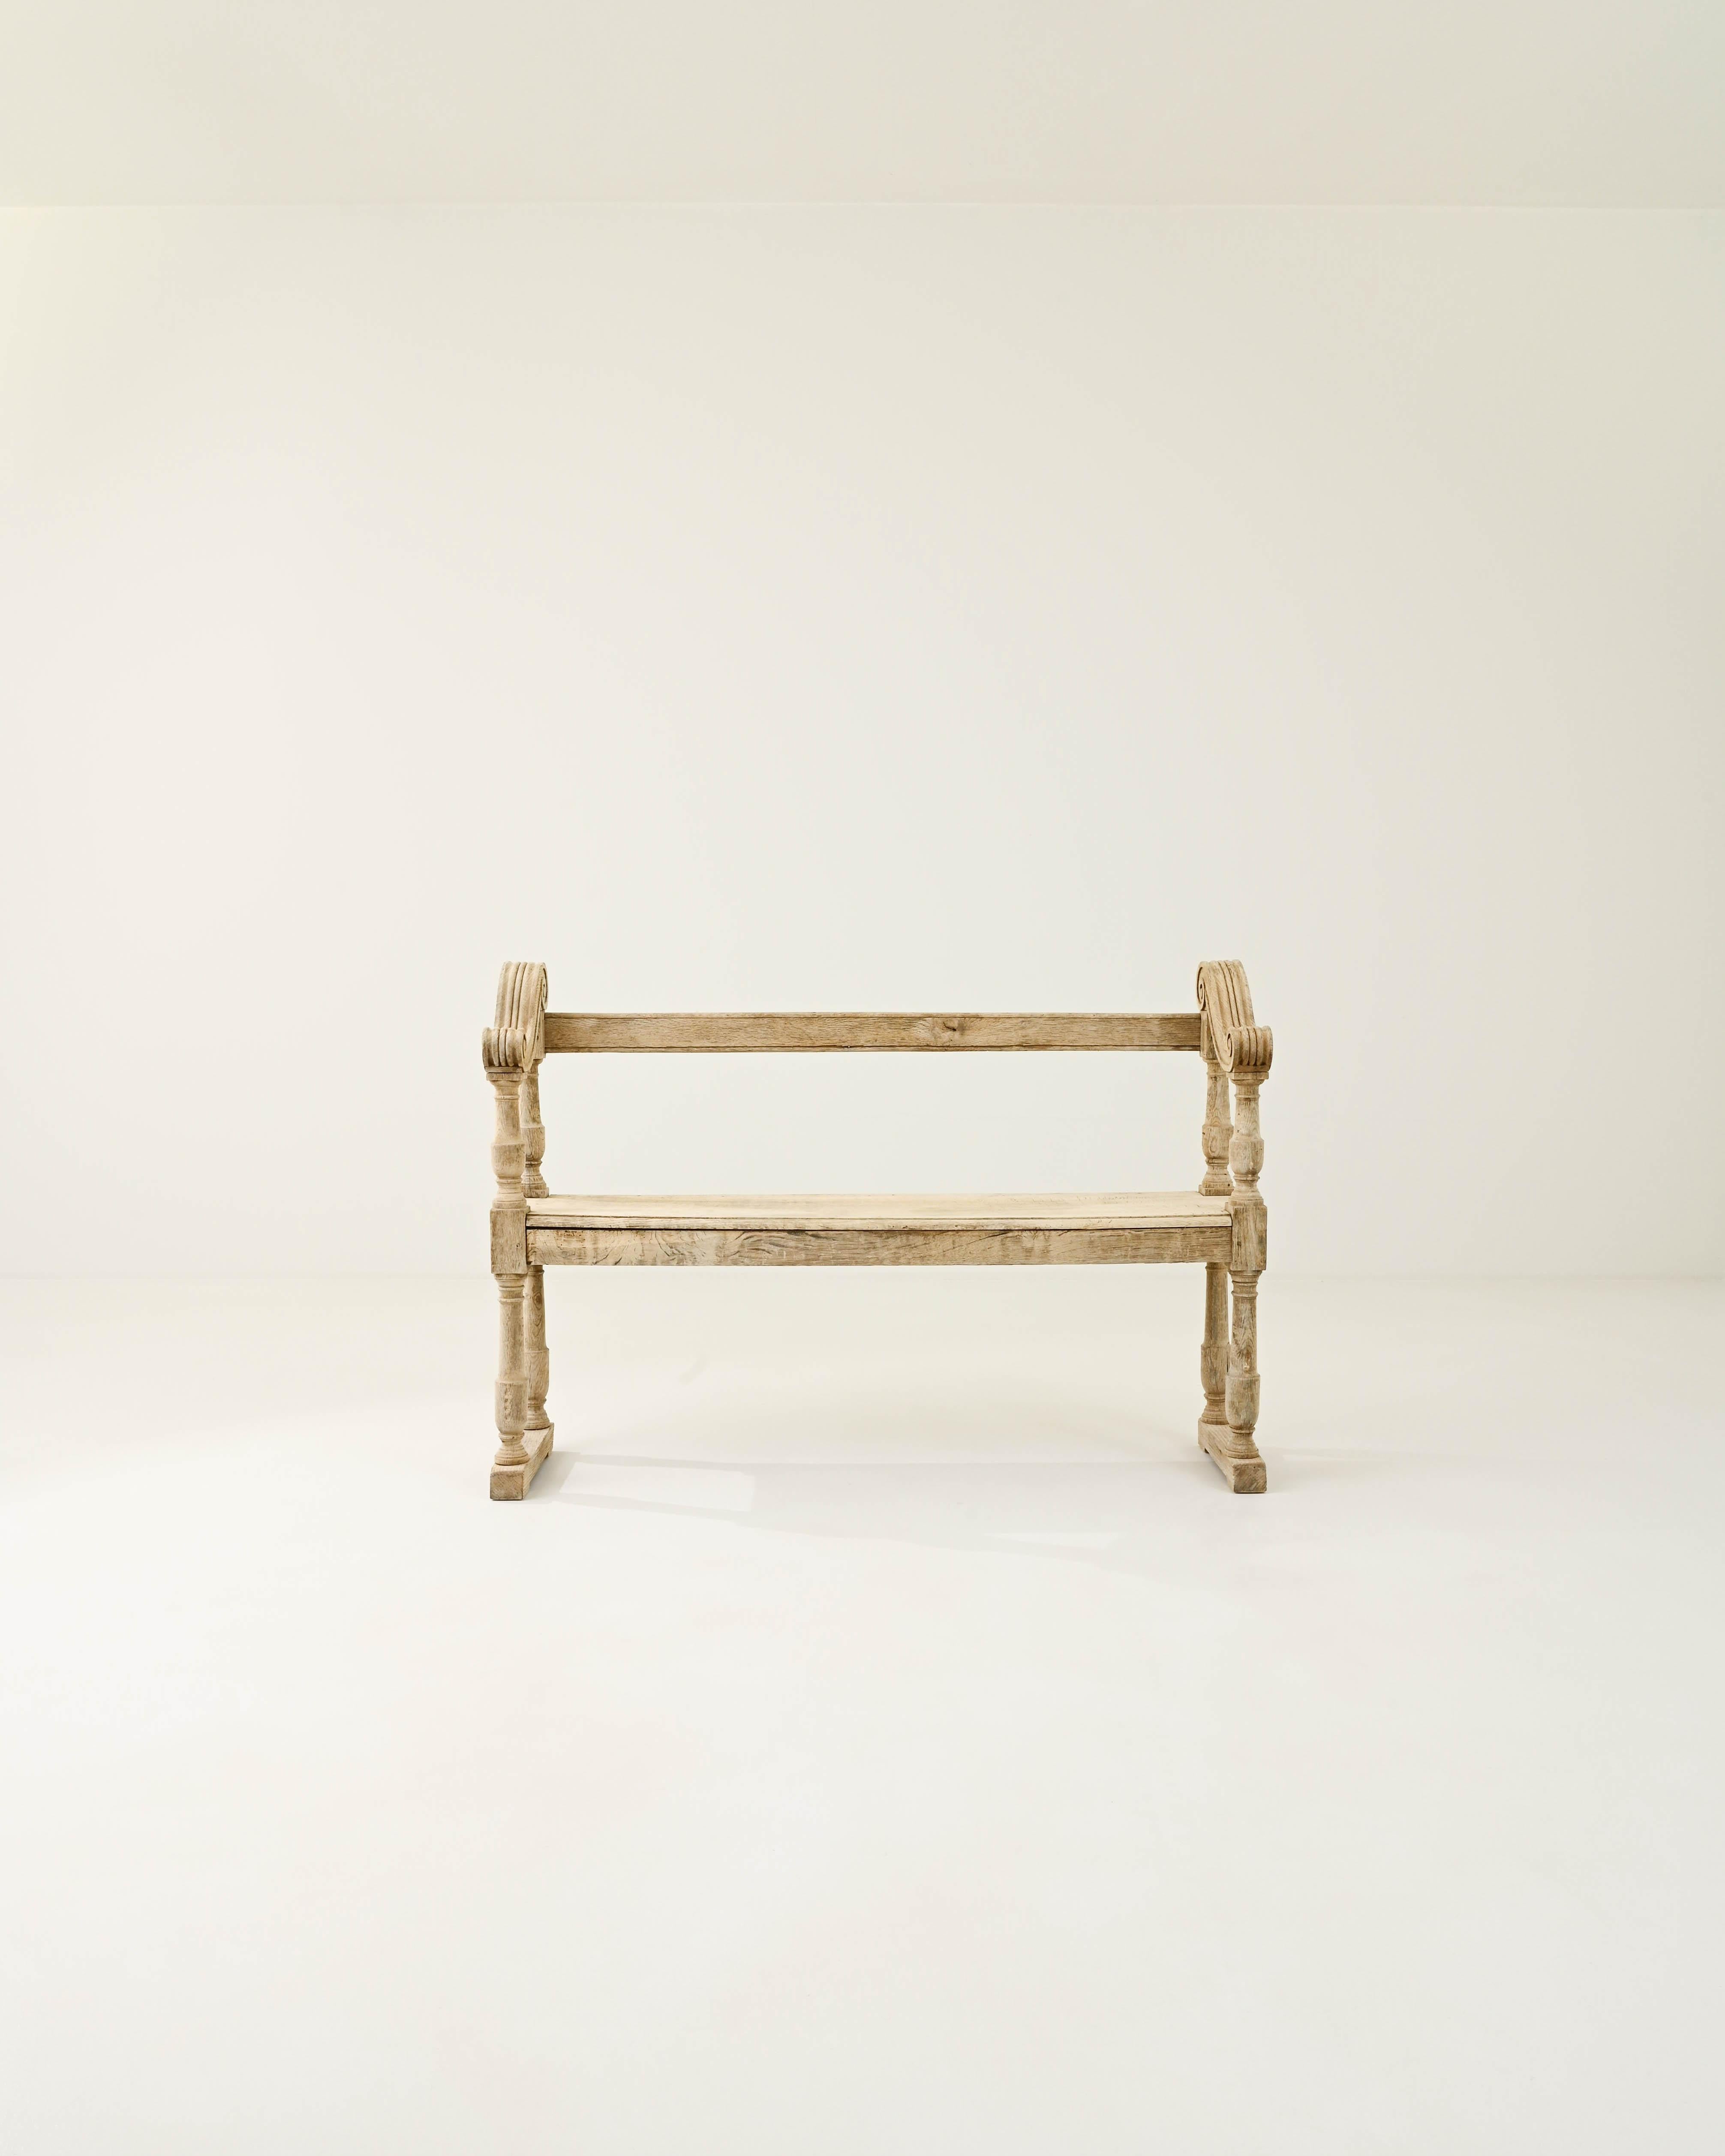 An oak bench from 19th century France. An upright pew-like frame, the sinuous slope of the armrests– fluted and scrolled– lends a graceful inflection. The wood has been restored to a natural finish, revealing the fine grain and subtle blush tones of